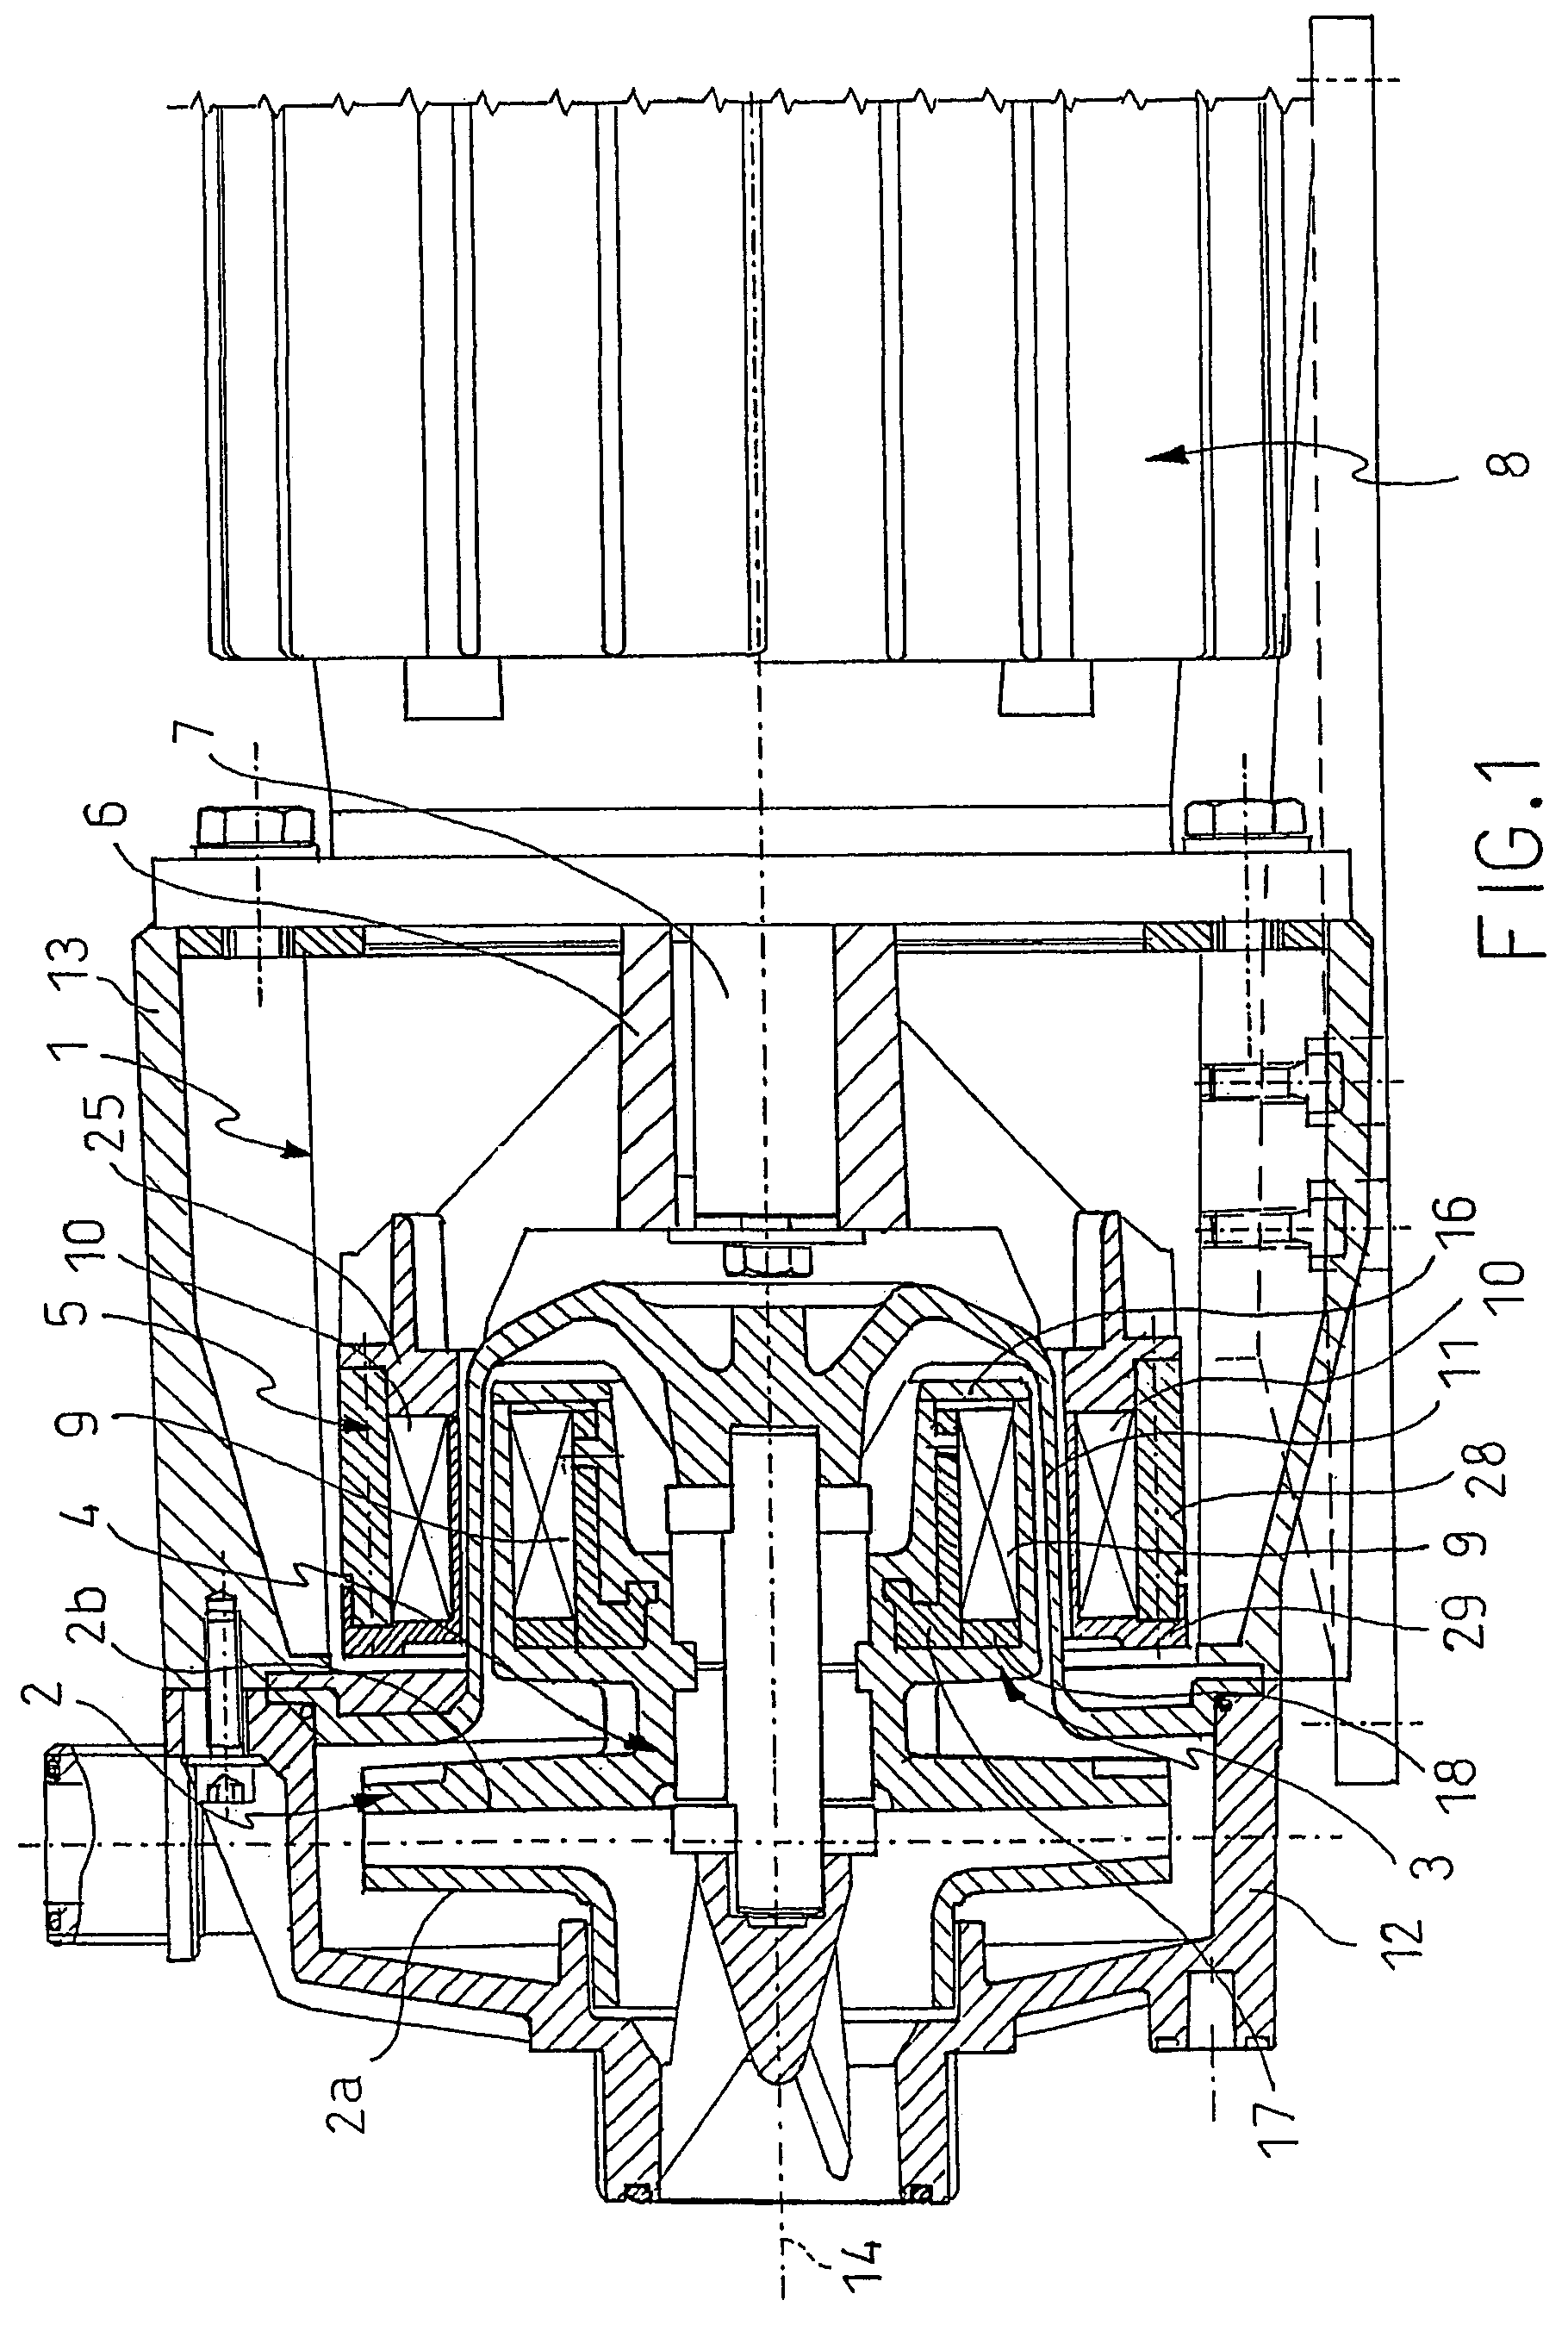 Mechanical drive system operating by magnetic force